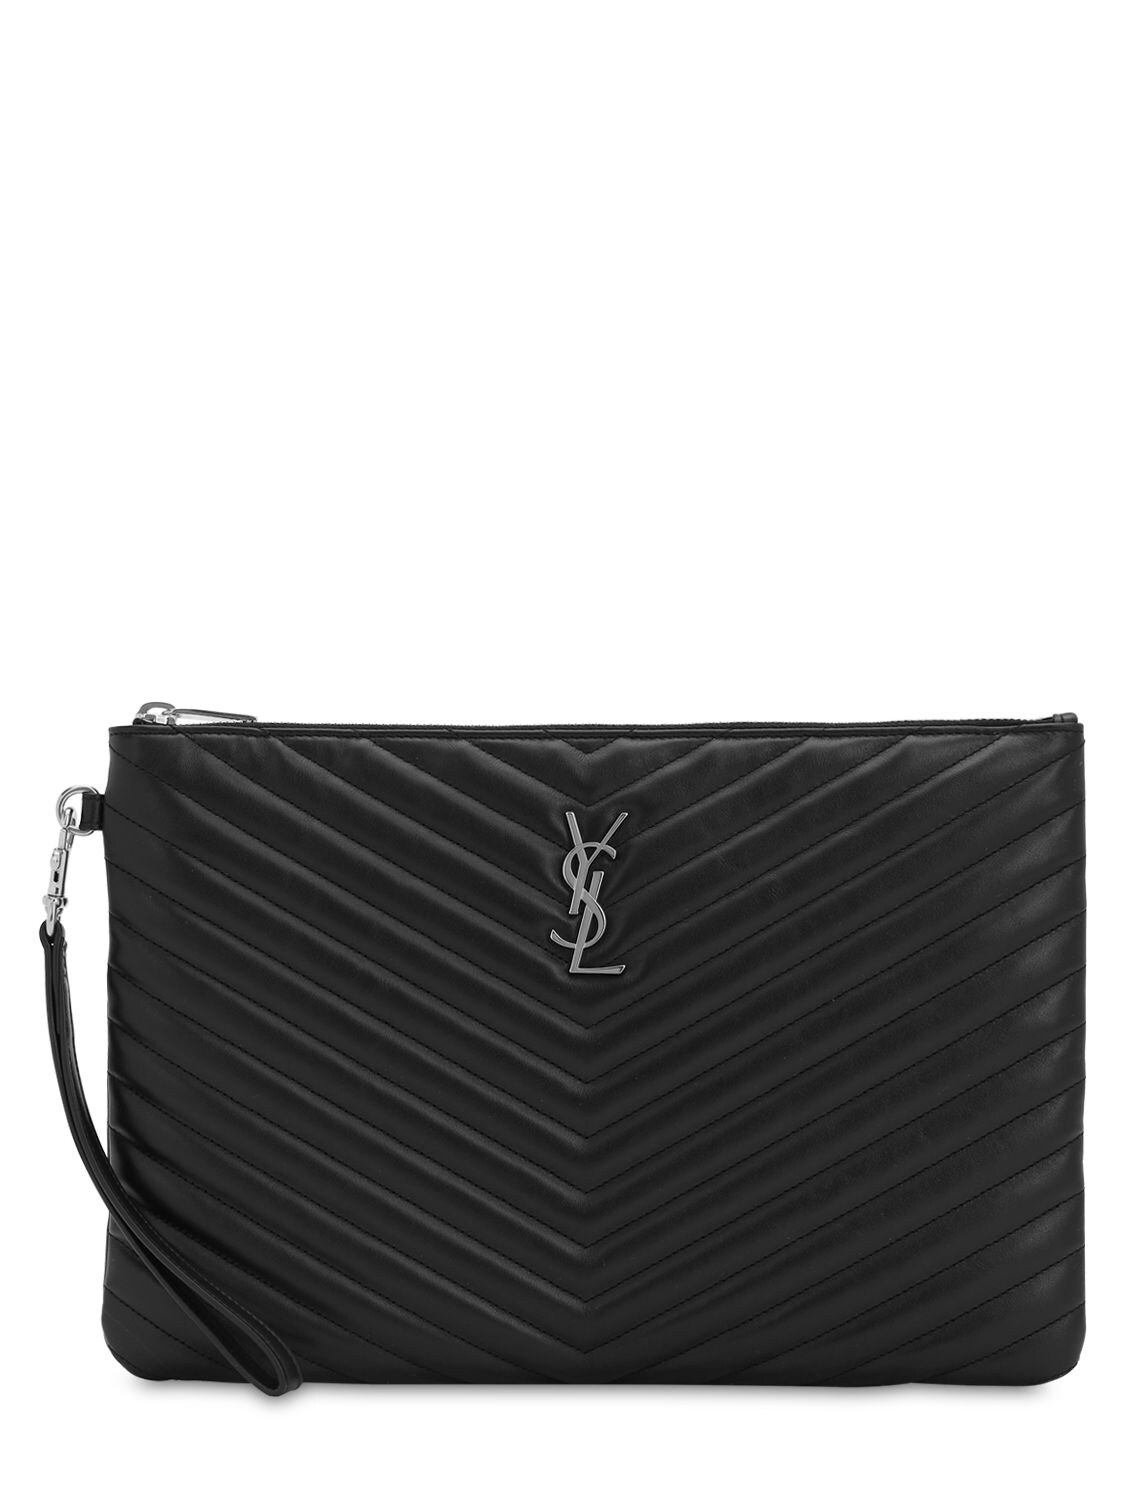 Saint Laurent Md Quilted Leather Pouch In Black